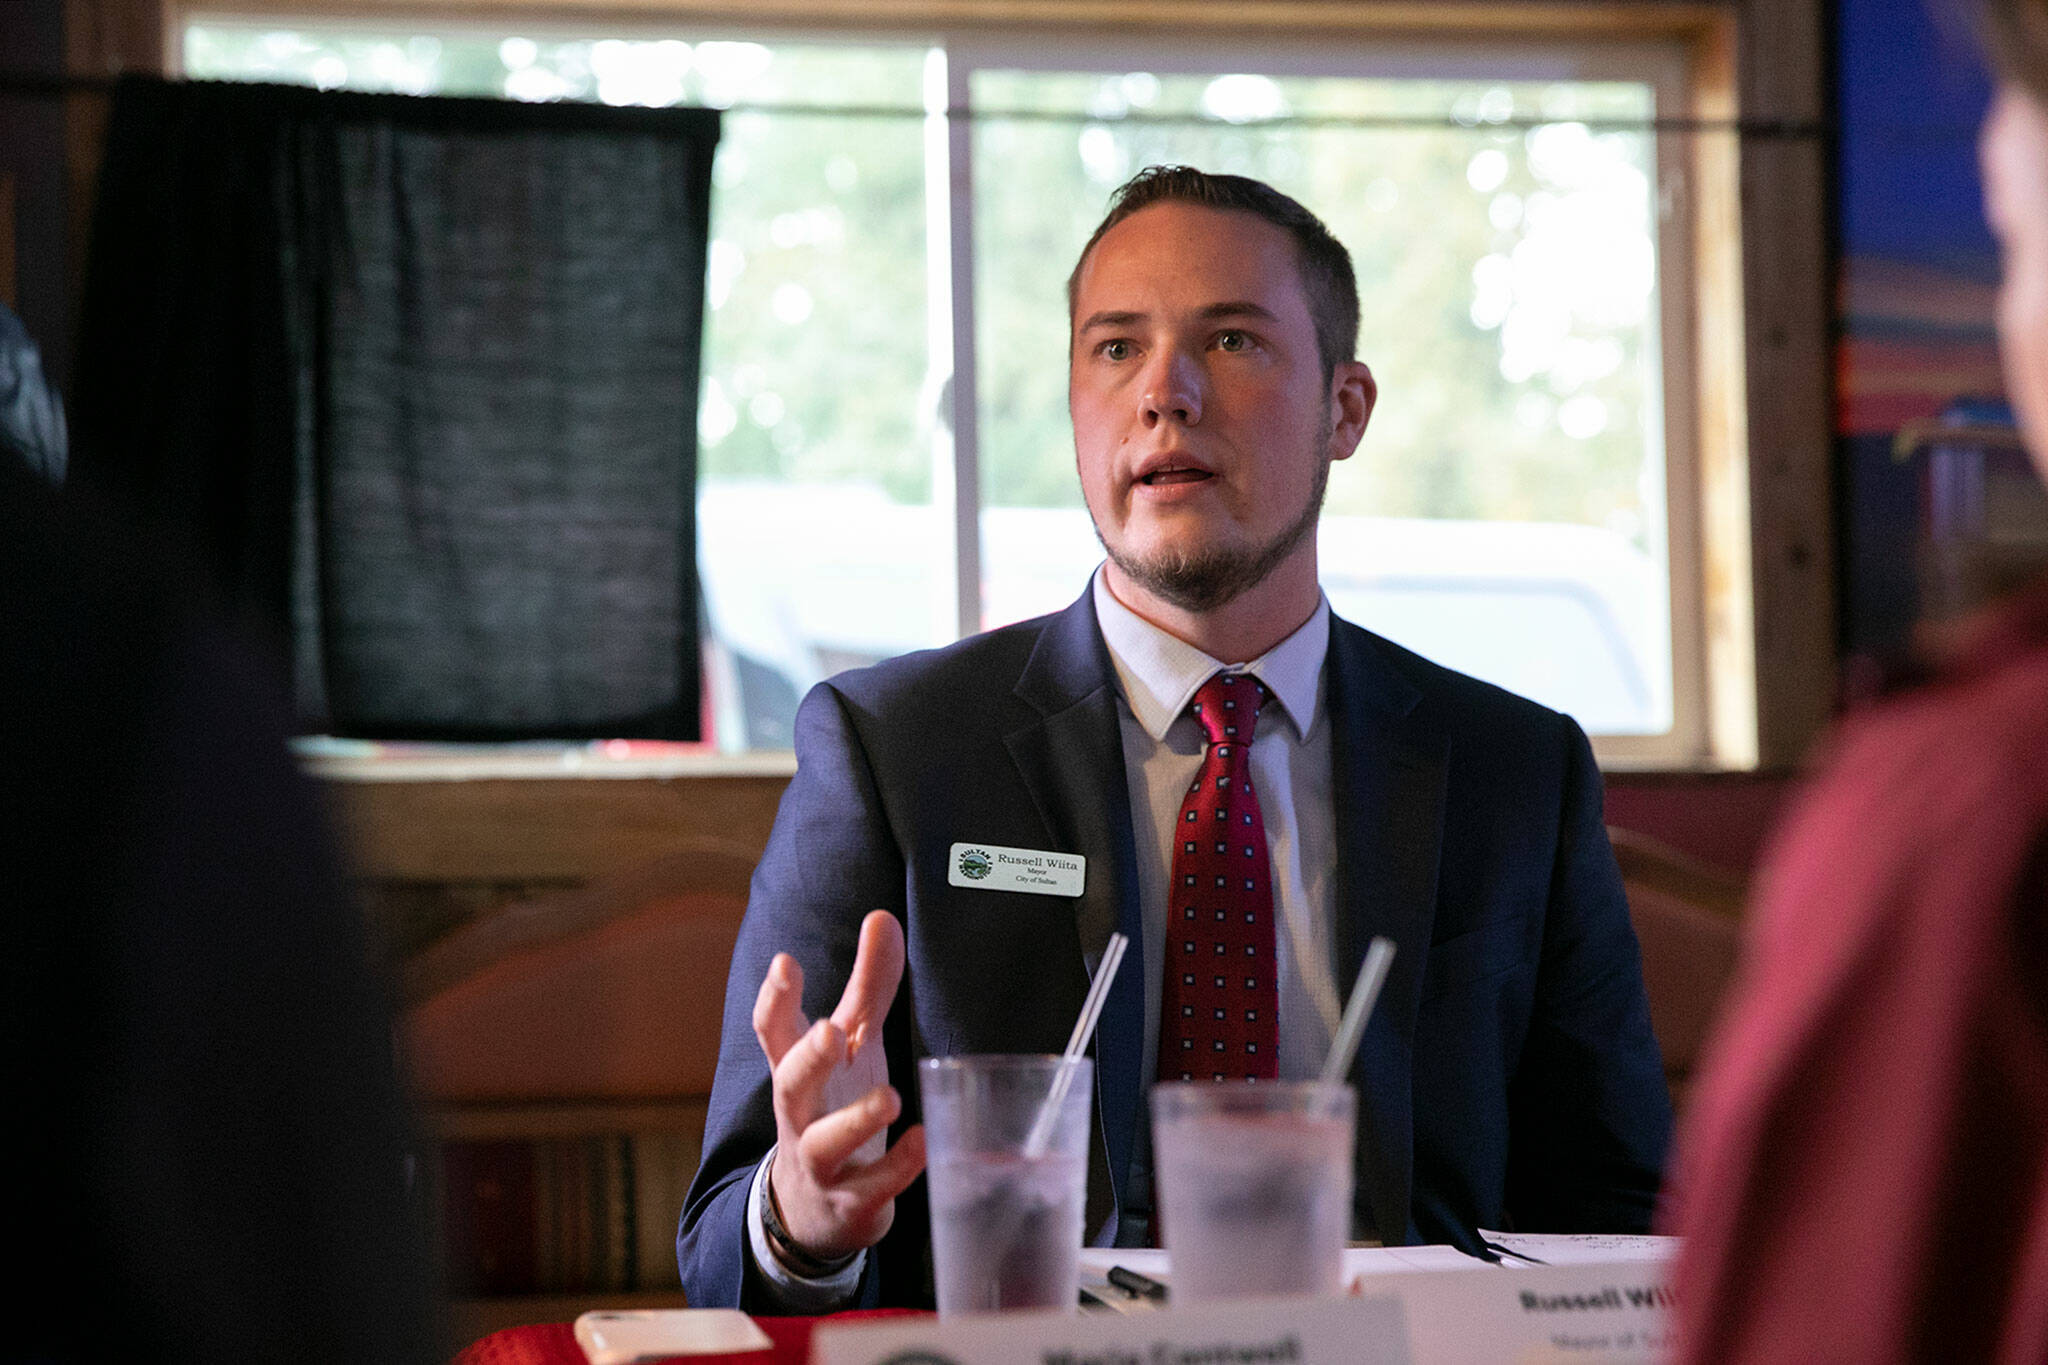 Russell Wiita, mayor of Sultan, helps lead a discussion during a meeting of local and state leaders addressing the effects of the Bolt Creek fire Thursday, at Bubba’s Roadhouse in Sultan. (Ryan Berry / The Herald)